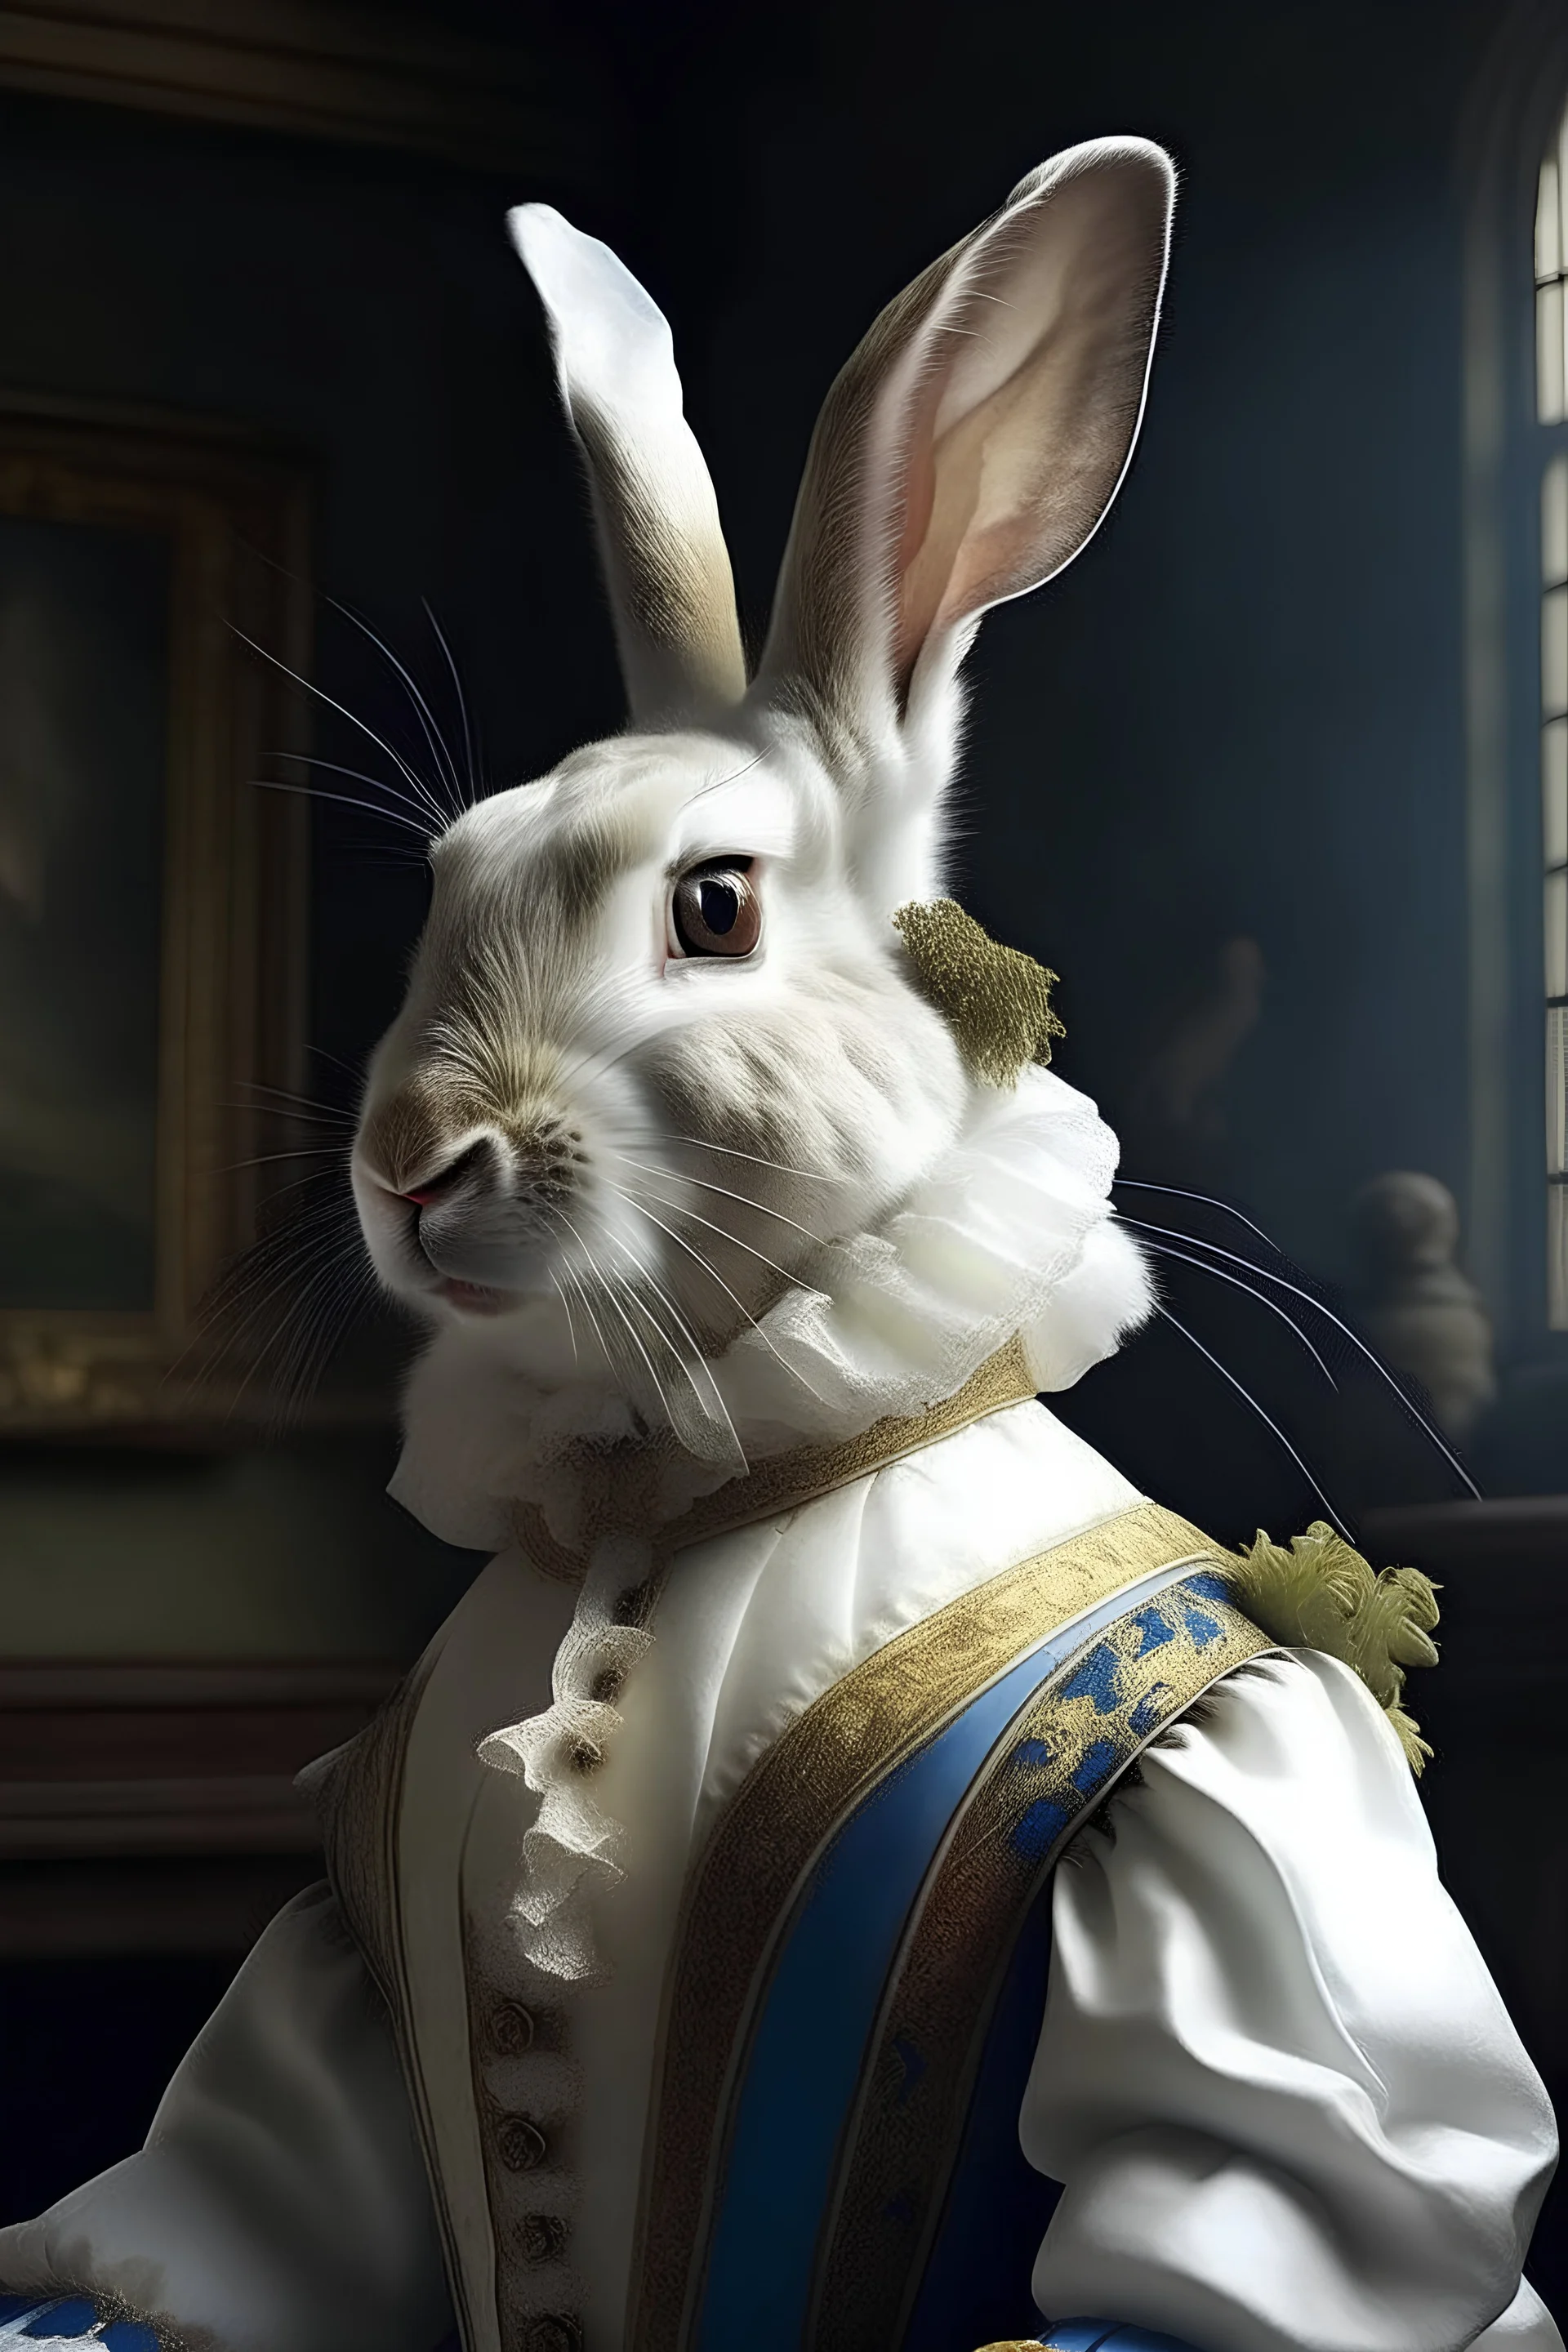 Bunny dressed as human, Medieval palace, animal portrait